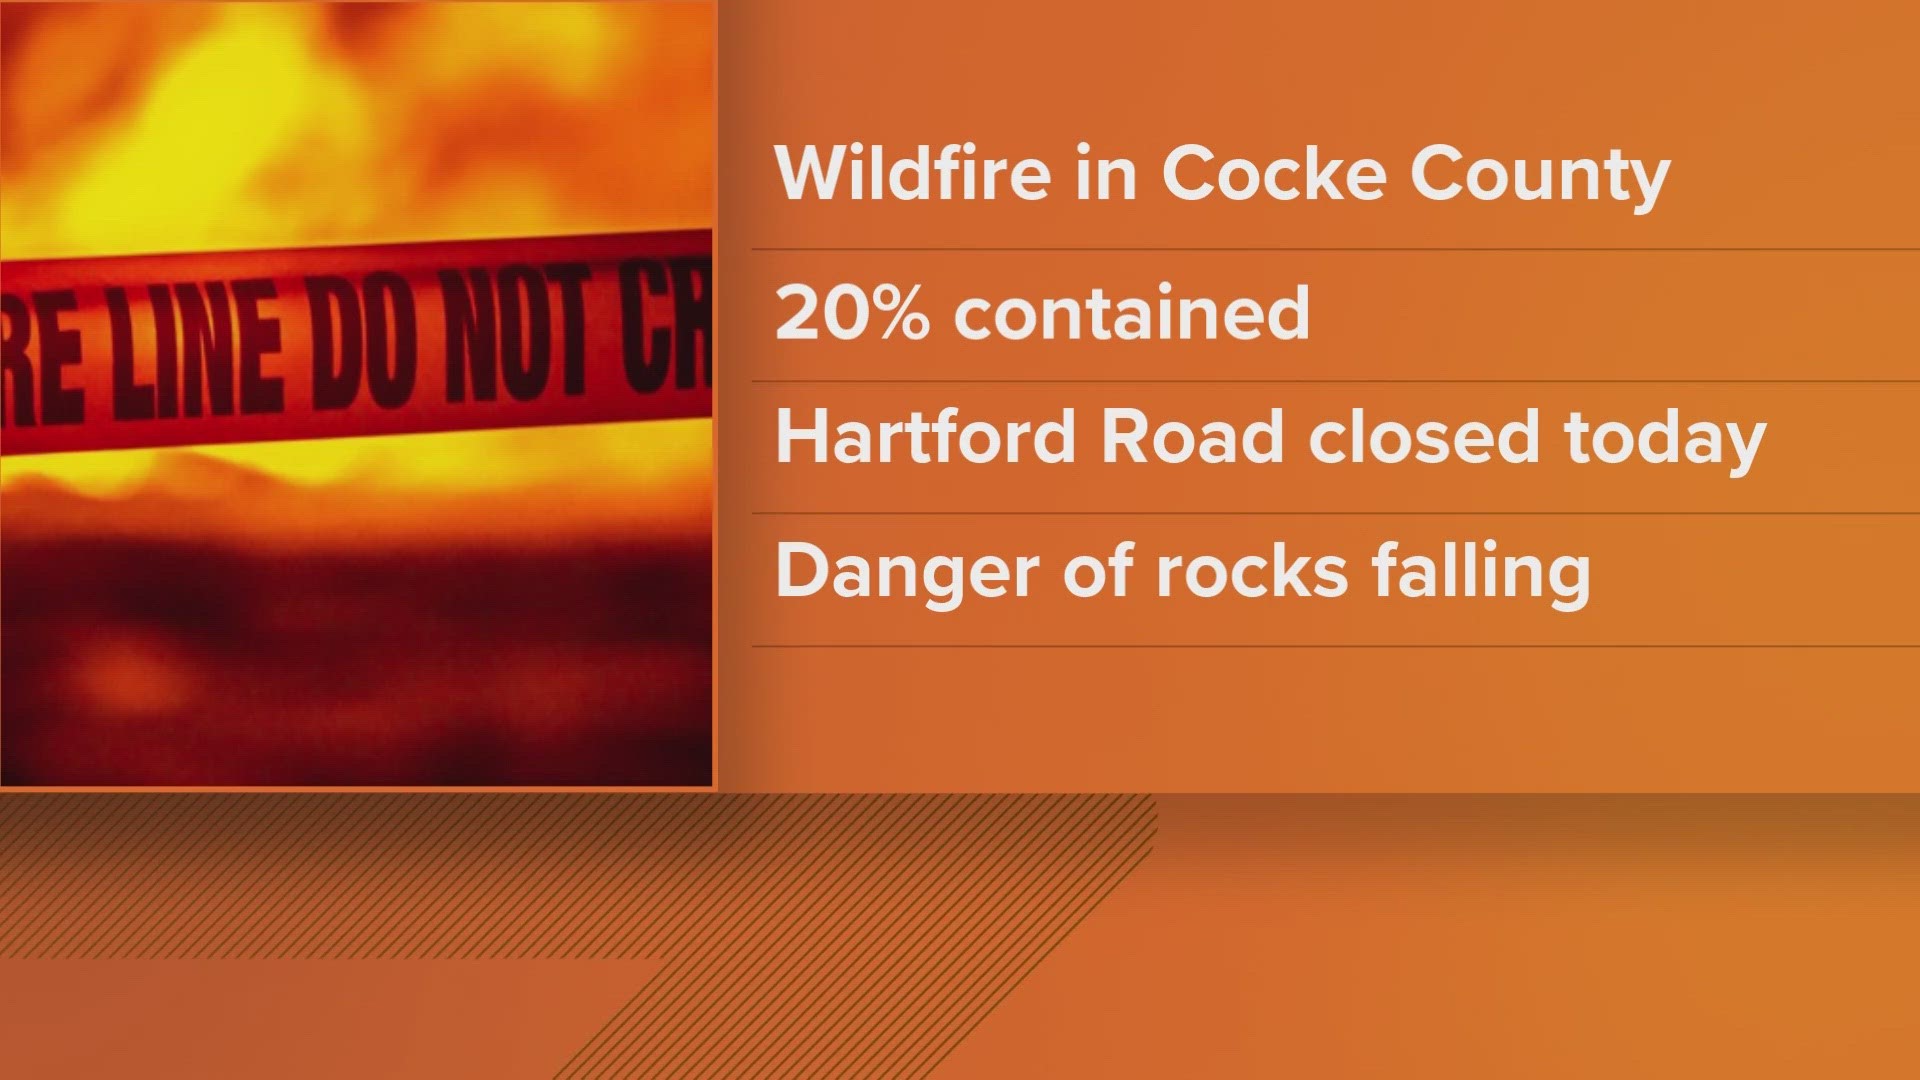 The fire is 20% contained, according to the Cocke County Emergency Management Agency.